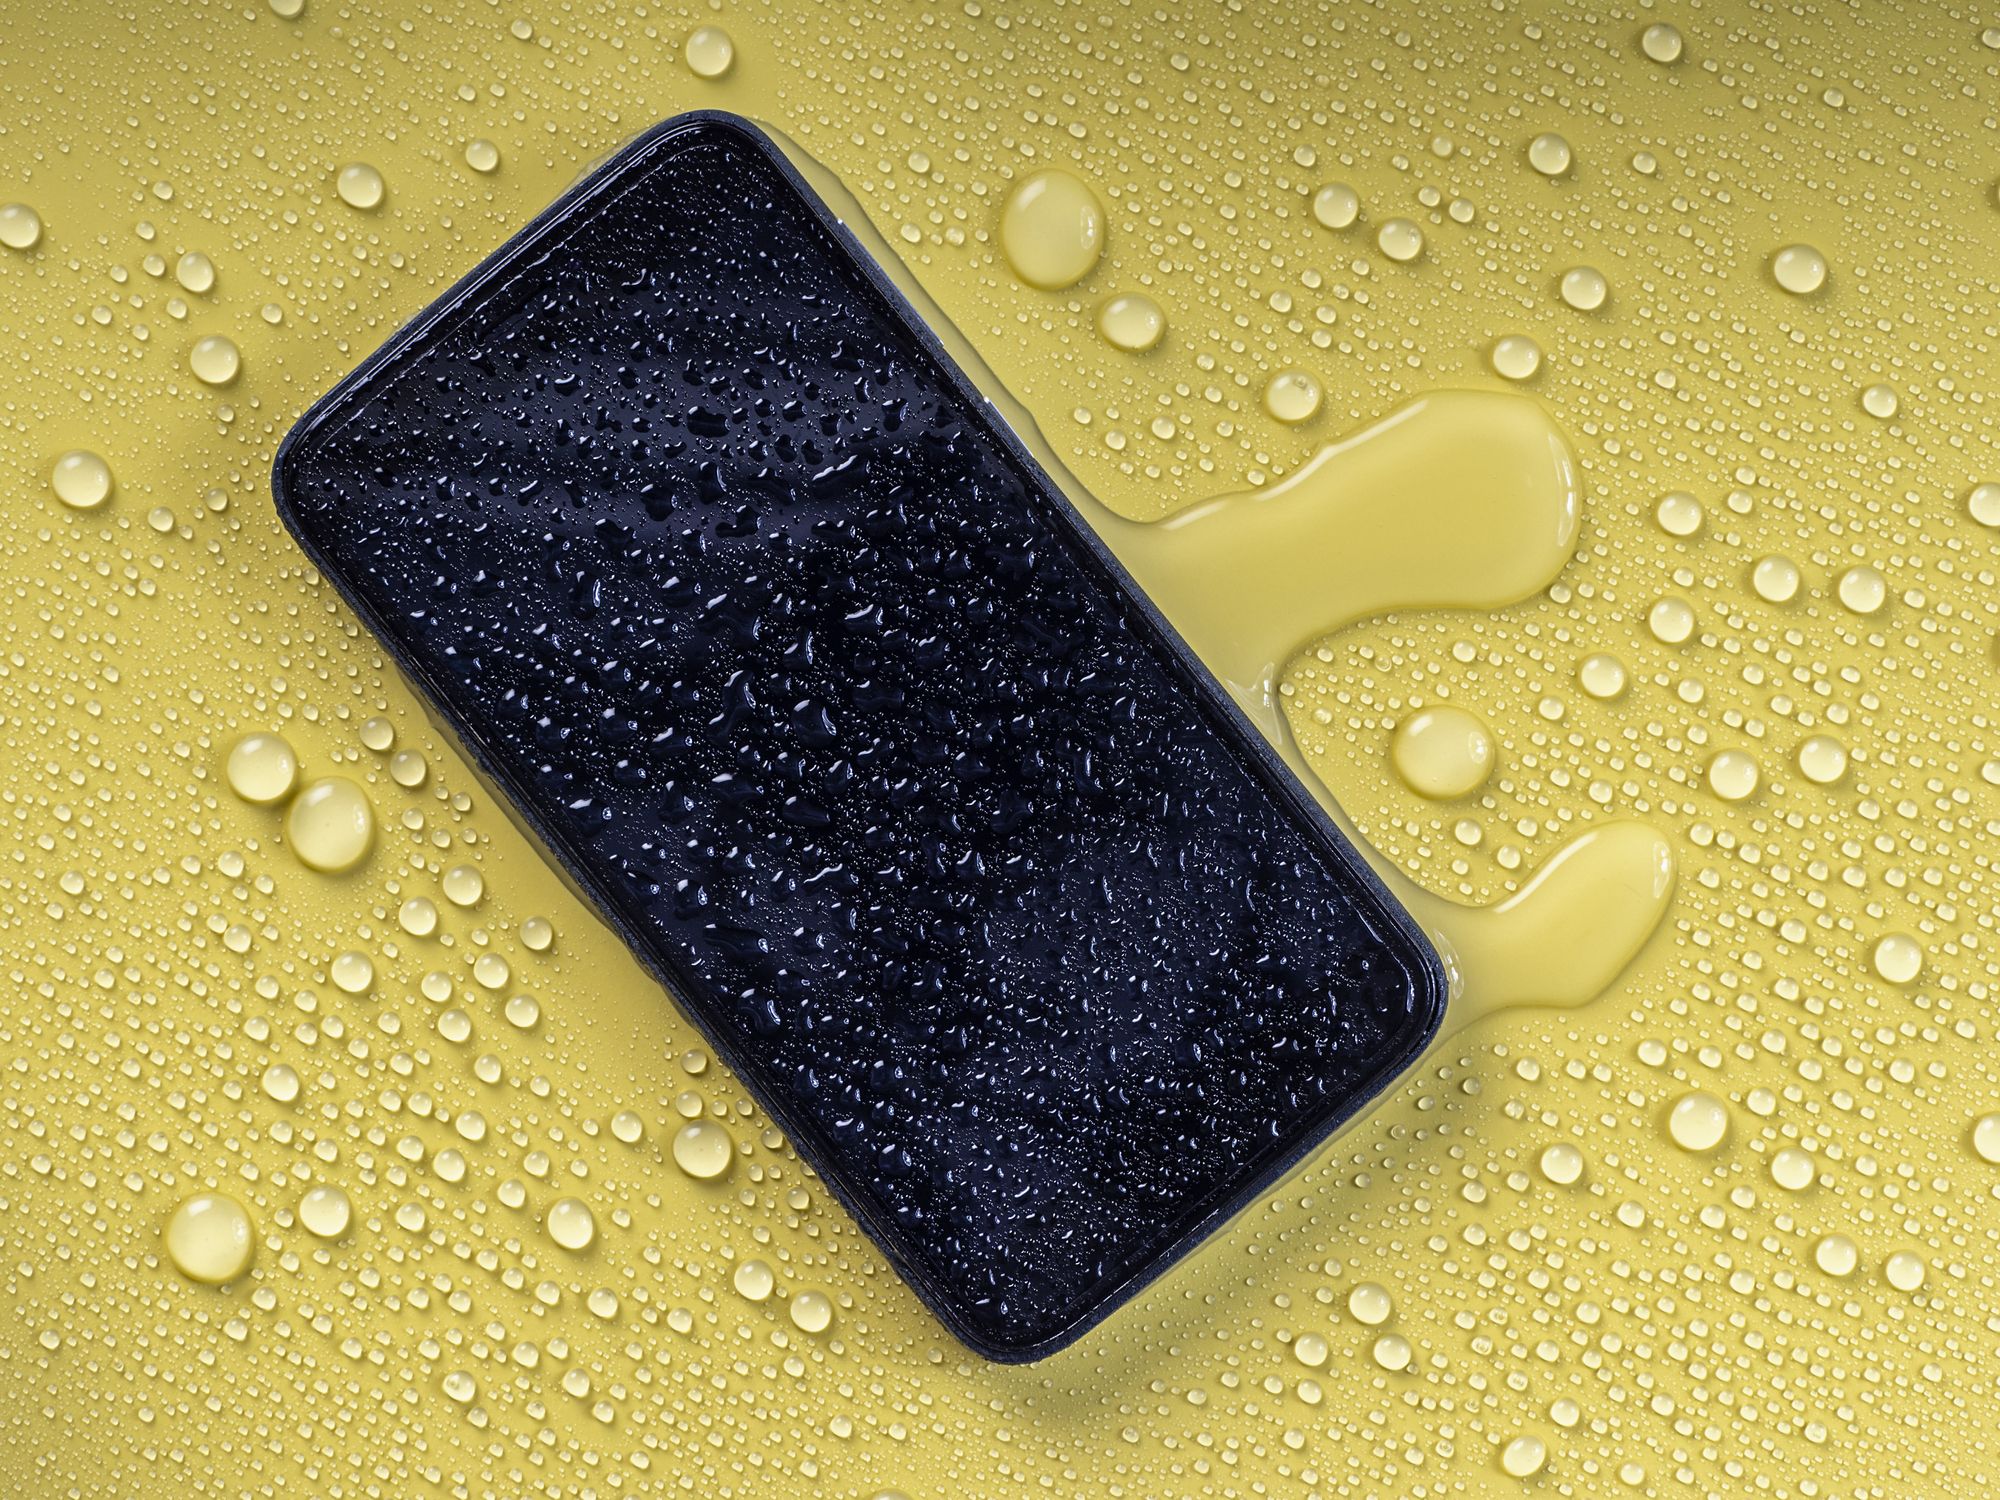 What to do if your smartphone gets wet